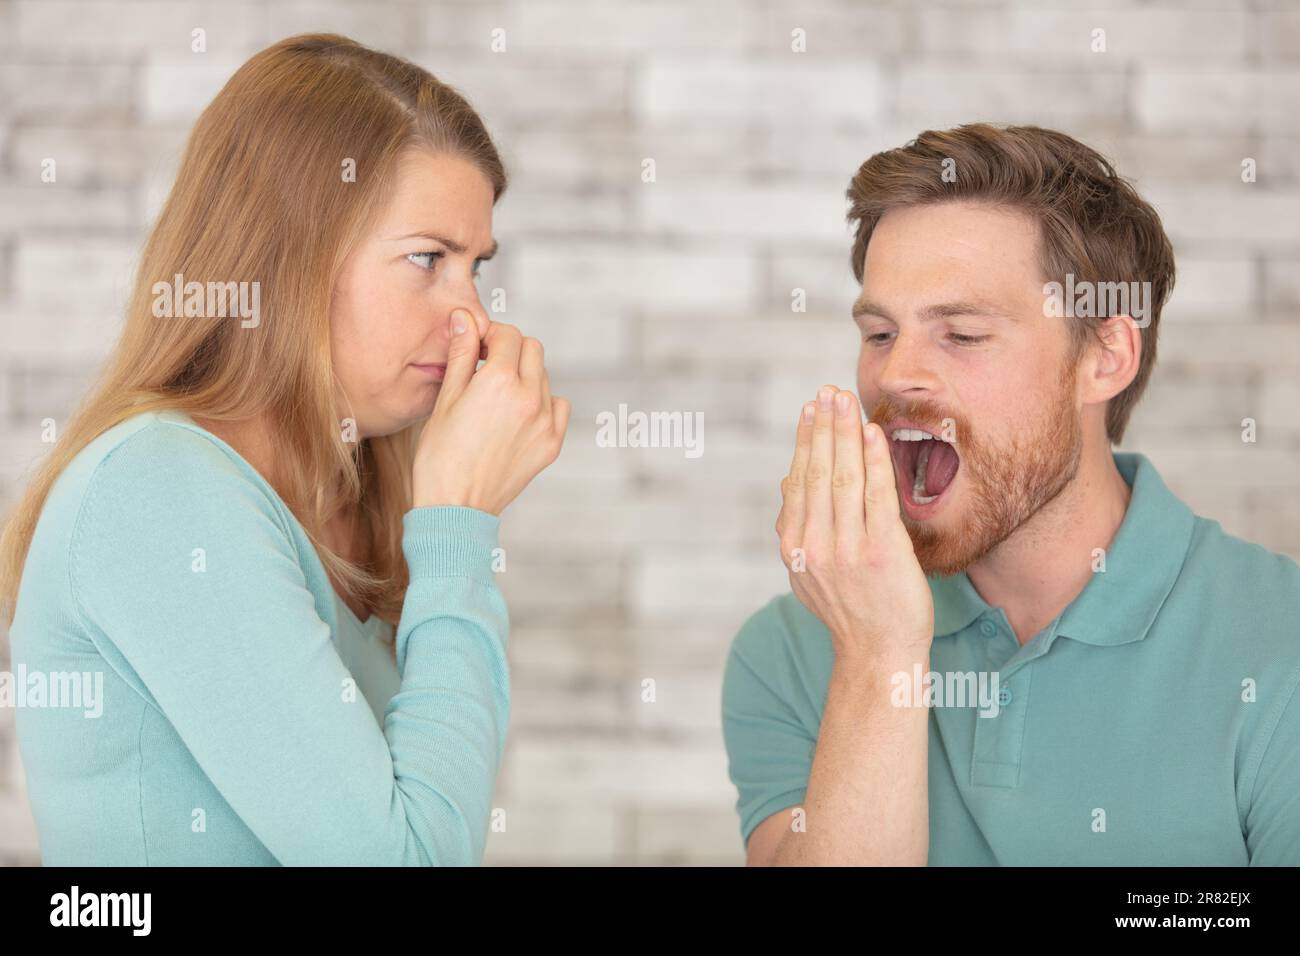 male and female gesturing stink yawning Stock Photo